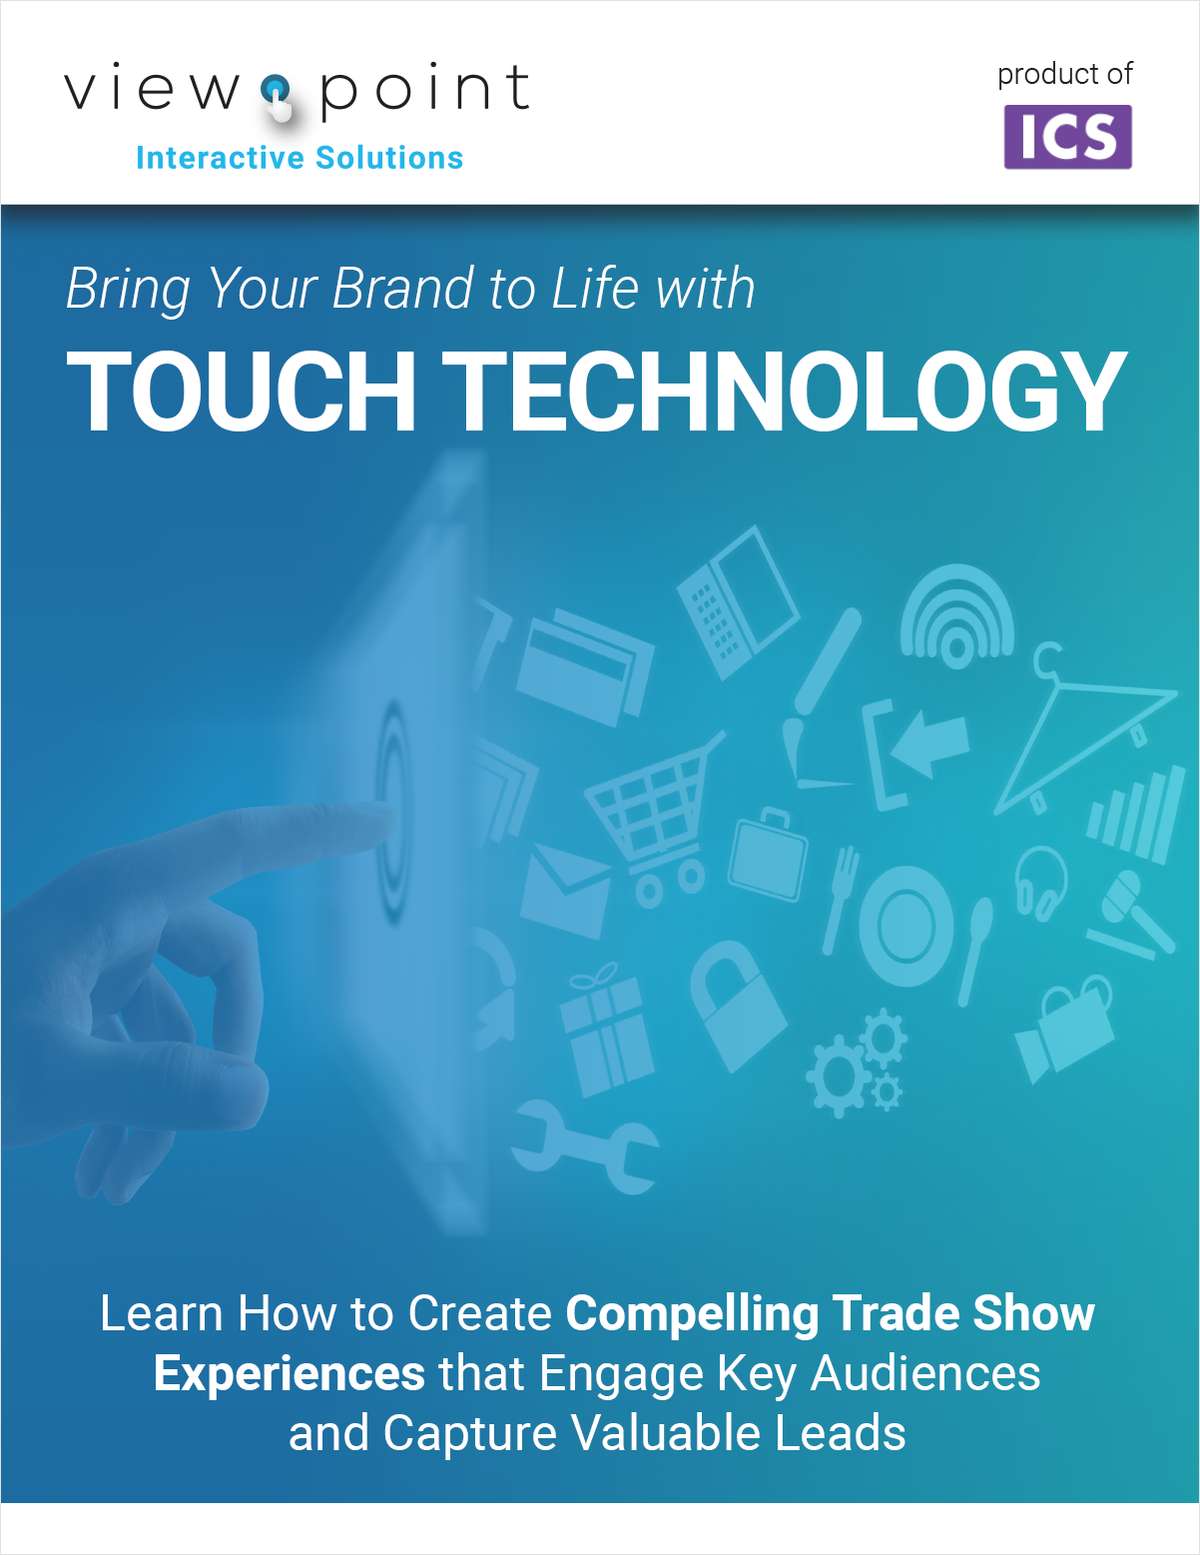 Learn How to Deliver Unforgettable Trade Show Experiences that Resonate with Buyers and Set Your Brand Apart